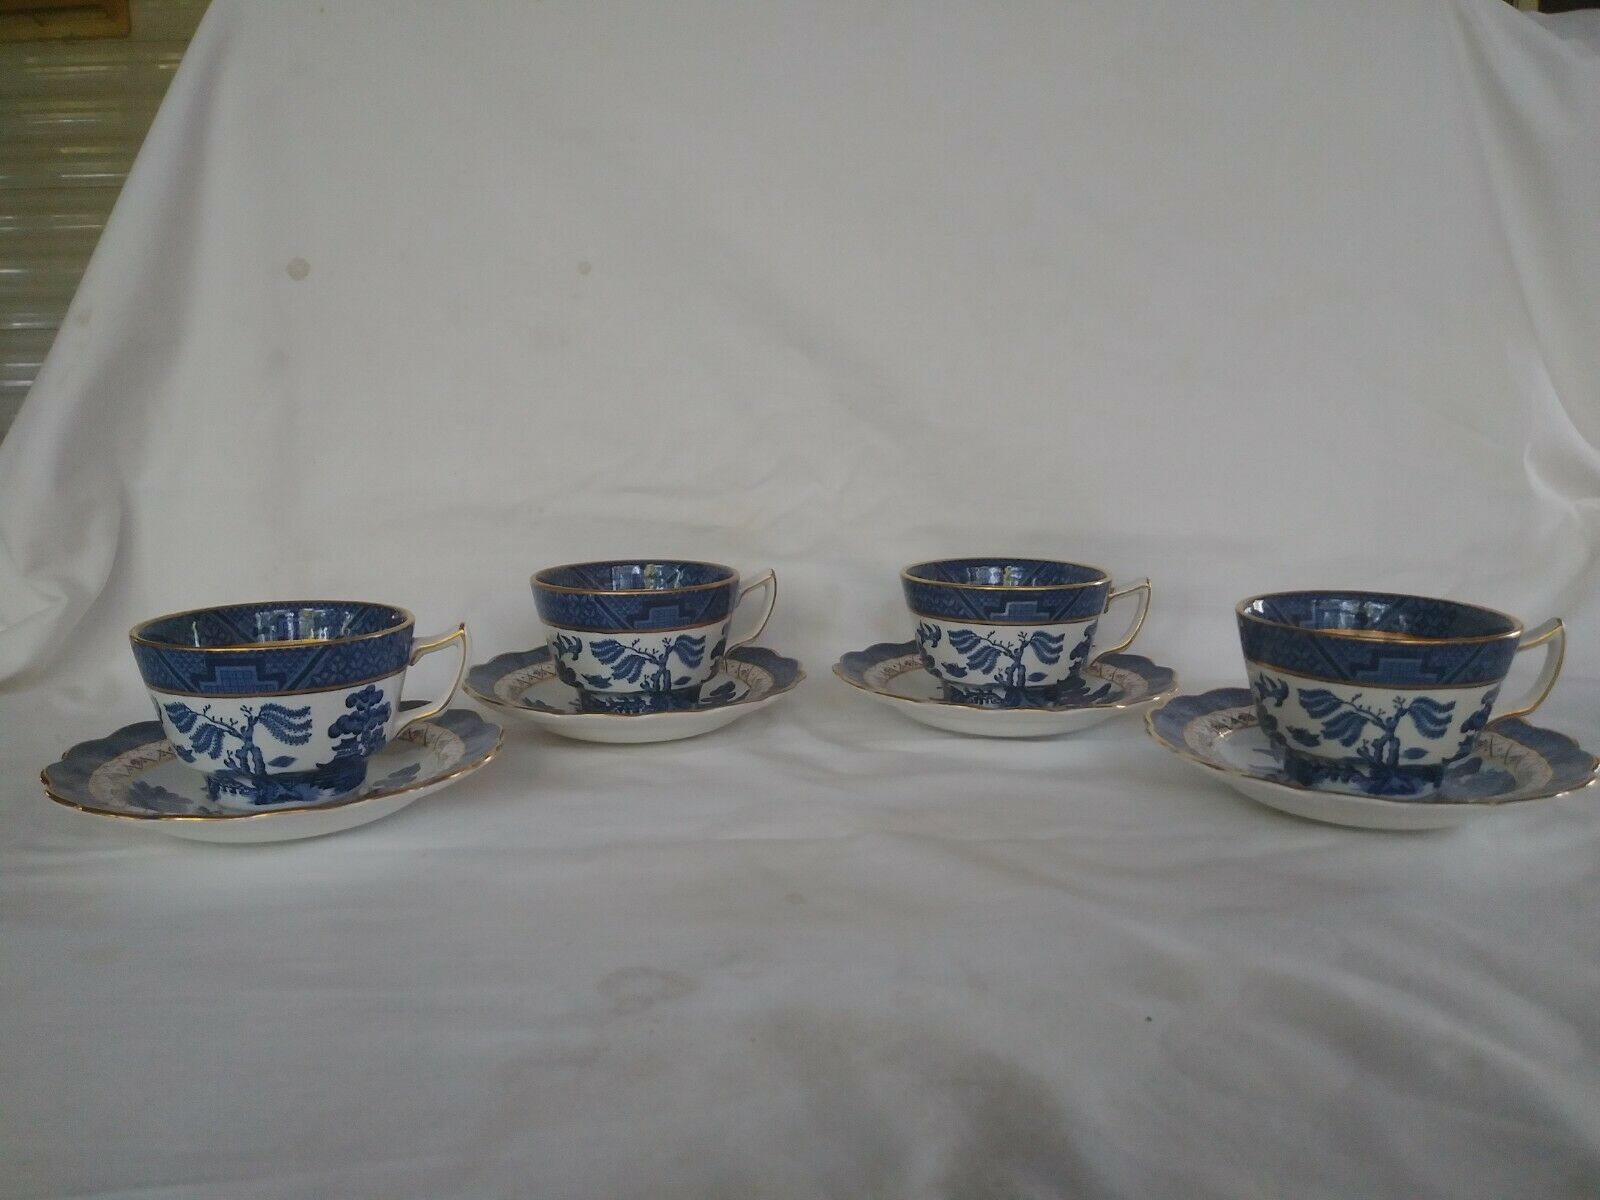 Booth's "real Old Willow" A8025 Set Of 4 Cups And Saucers Lot "b"